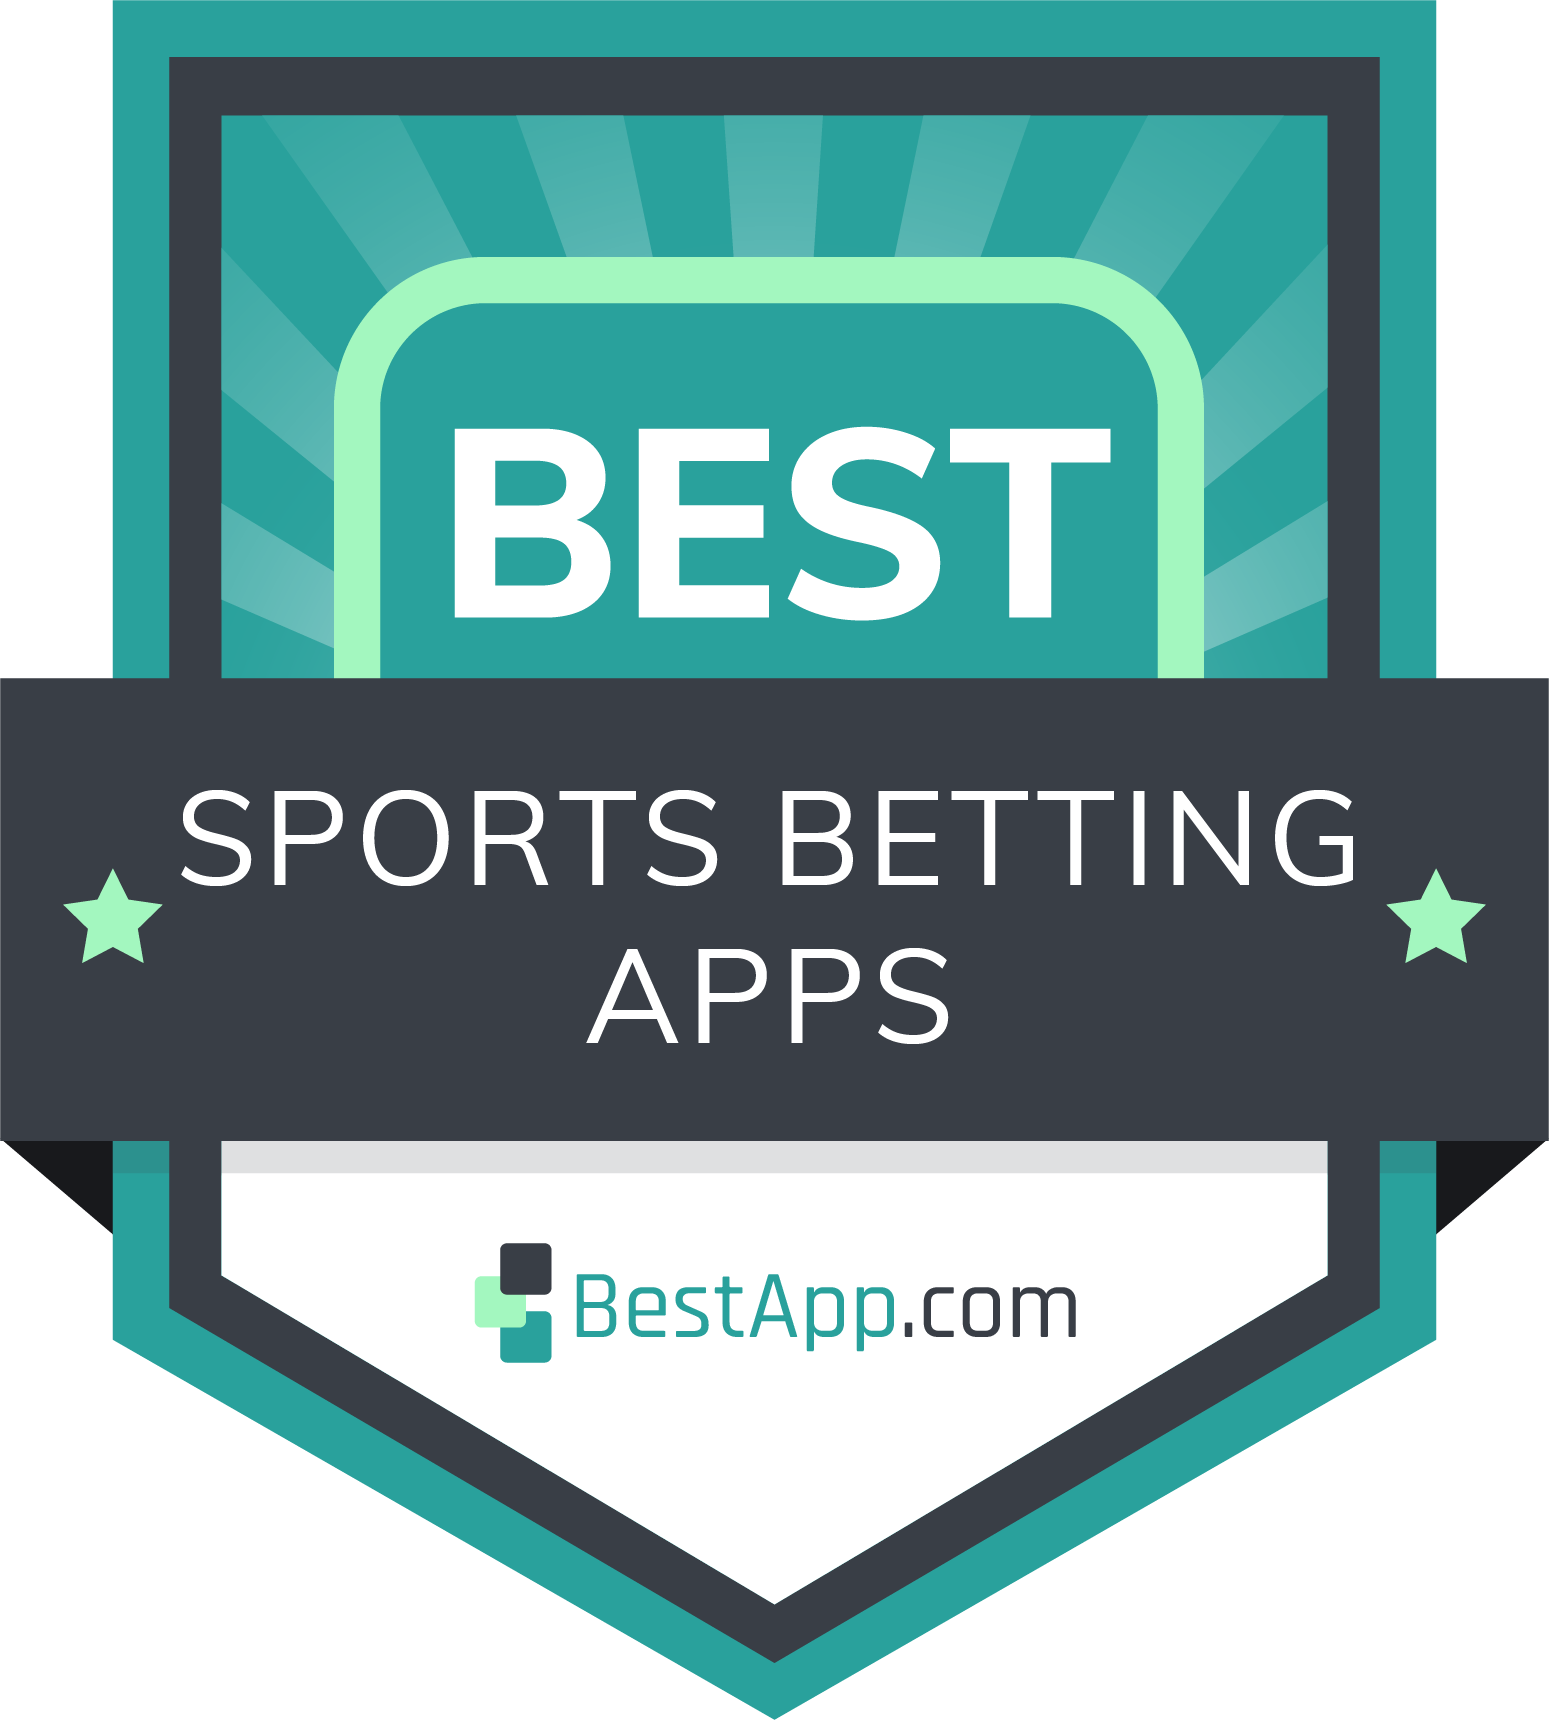 The Hollistic Aproach To Ipl Betting App 2022